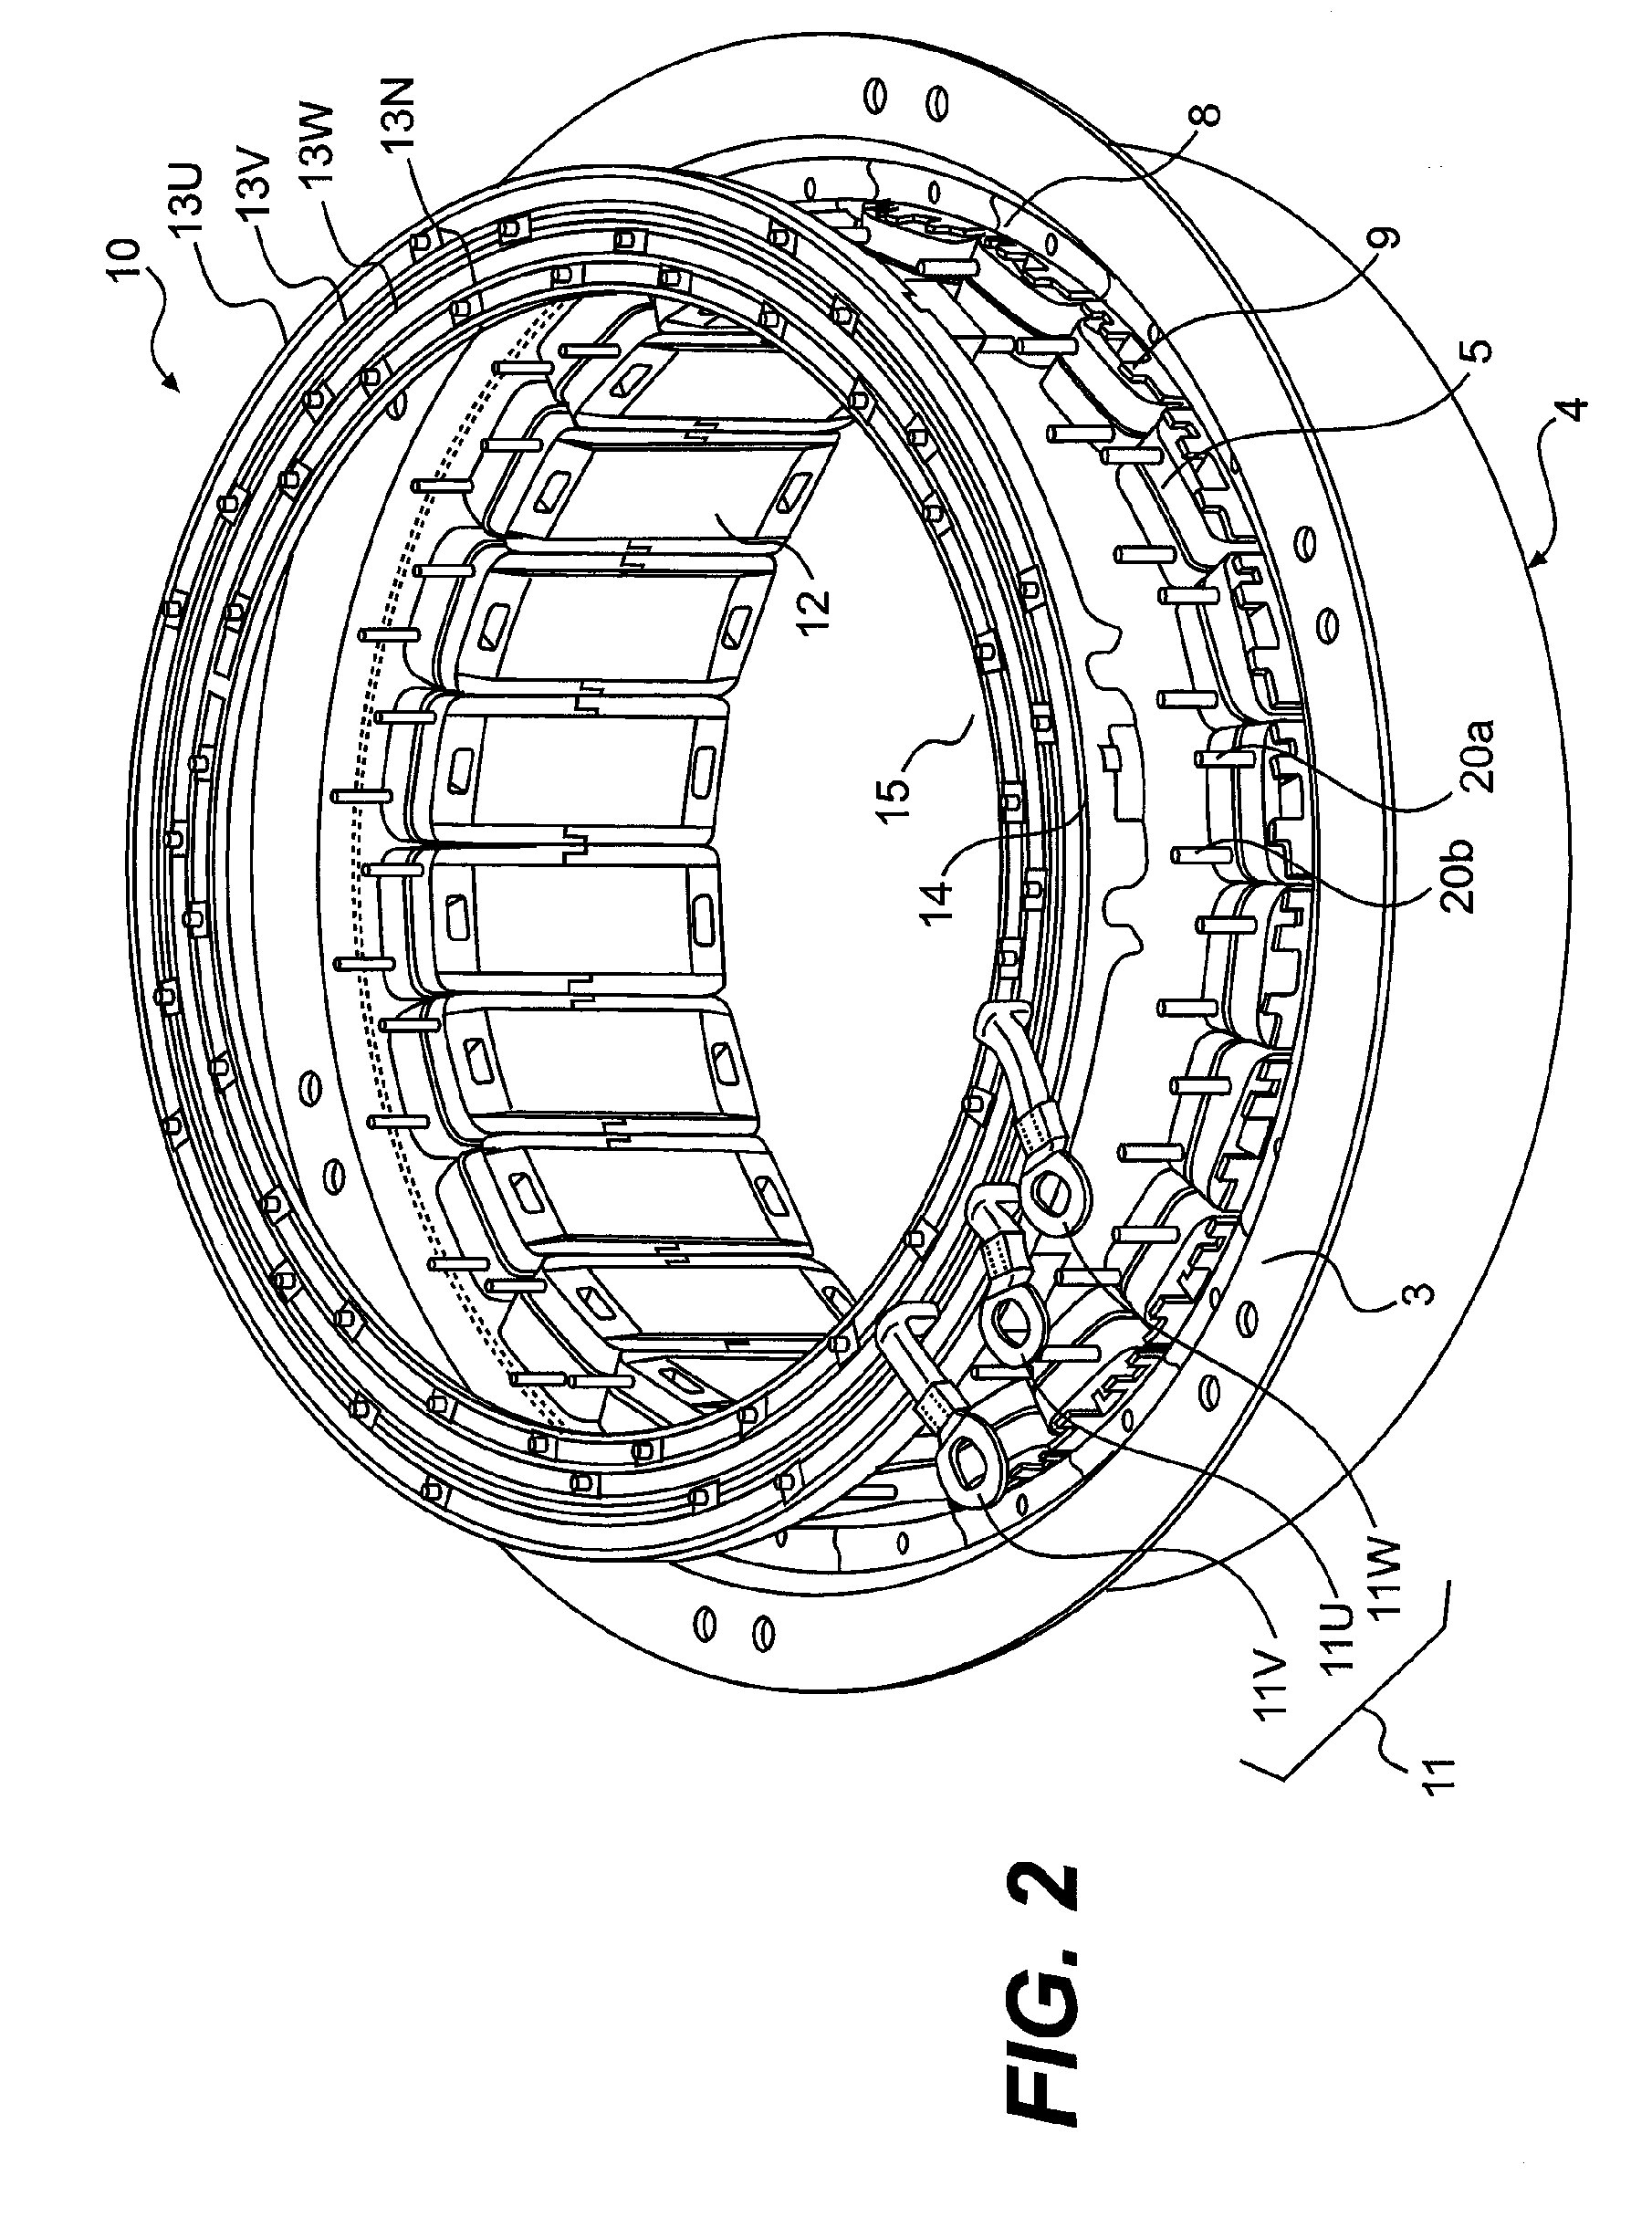 Rotary Electric Machine, Power Distribution Unit Therefor and Method for Assembling Rotary Electric Machine